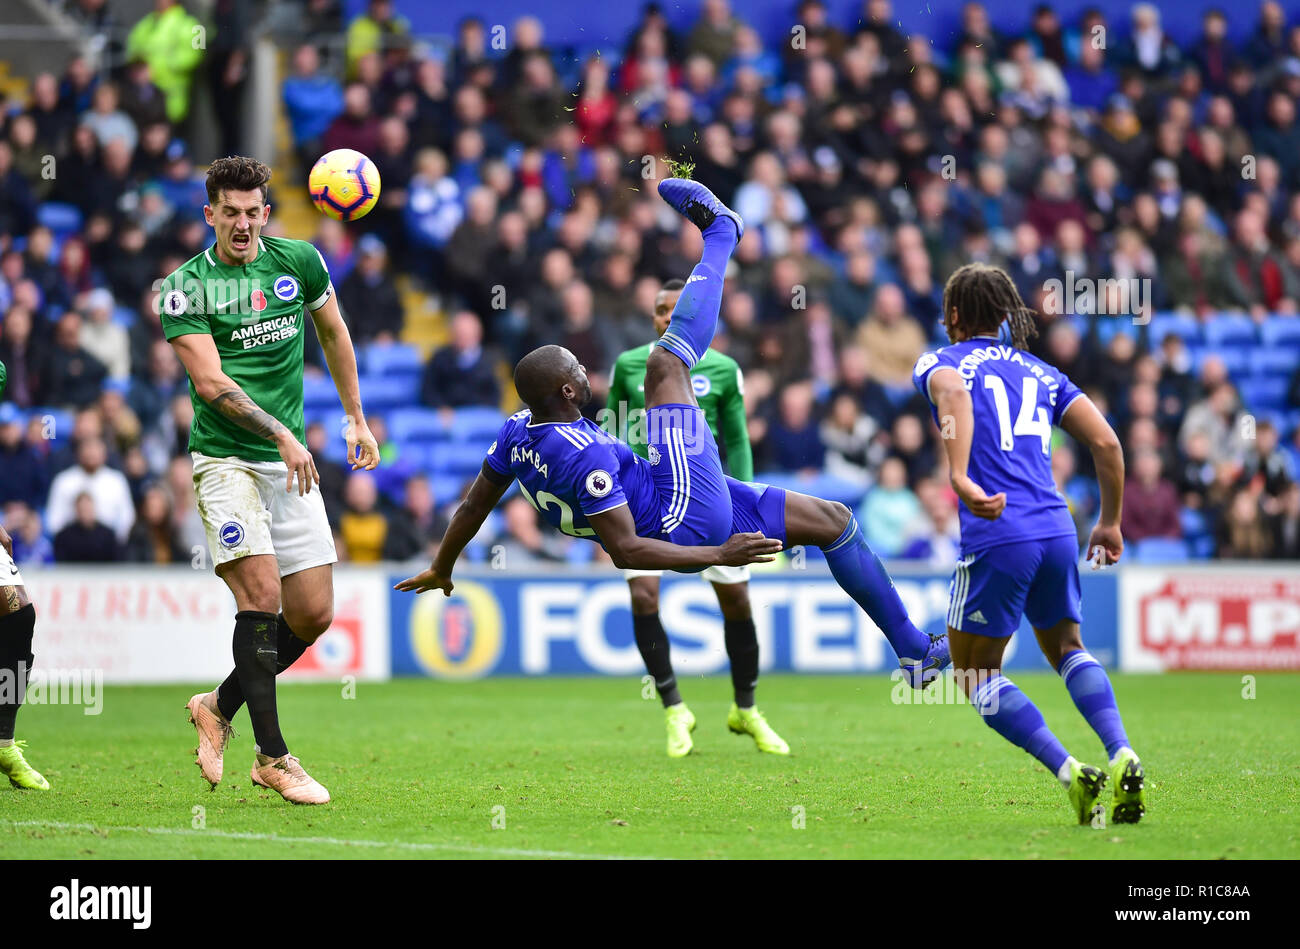 Sol Bamba  of Cardiff with his overhead kick which led to Cardiffs winner during the Premier League match between Cardiff City and Brighton and Hove Albion at the Cardiff City Stadium . 10 Nov 2018 Editorial use only. No merchandising. For Football images FA and Premier League restrictions apply inc. no internet/mobile usage without FAPL license - for details contact Football Dataco Stock Photo